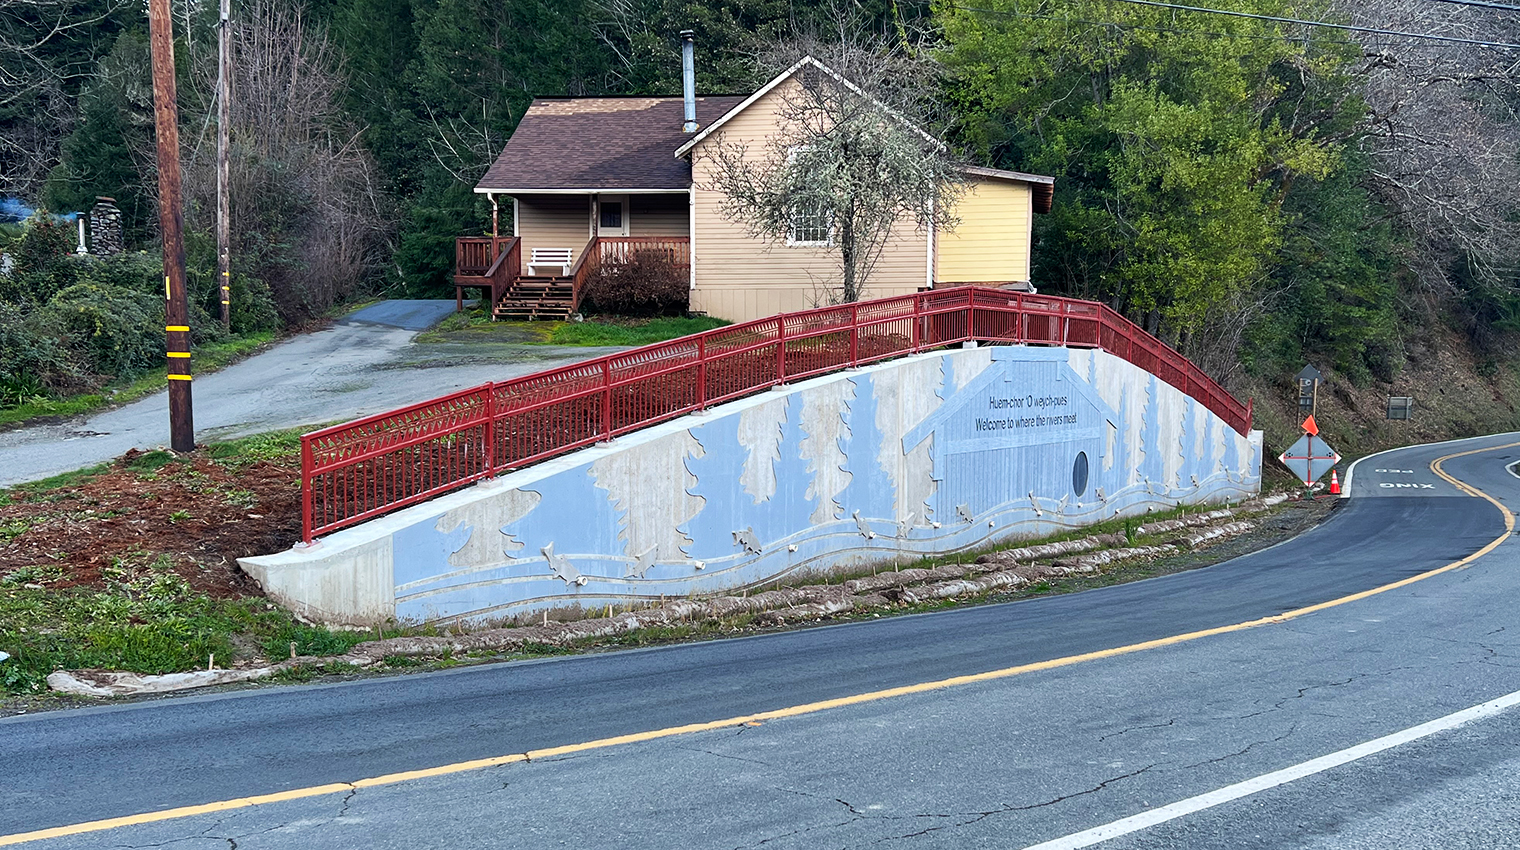 Photo of a tribal heritage monument along a roadway.